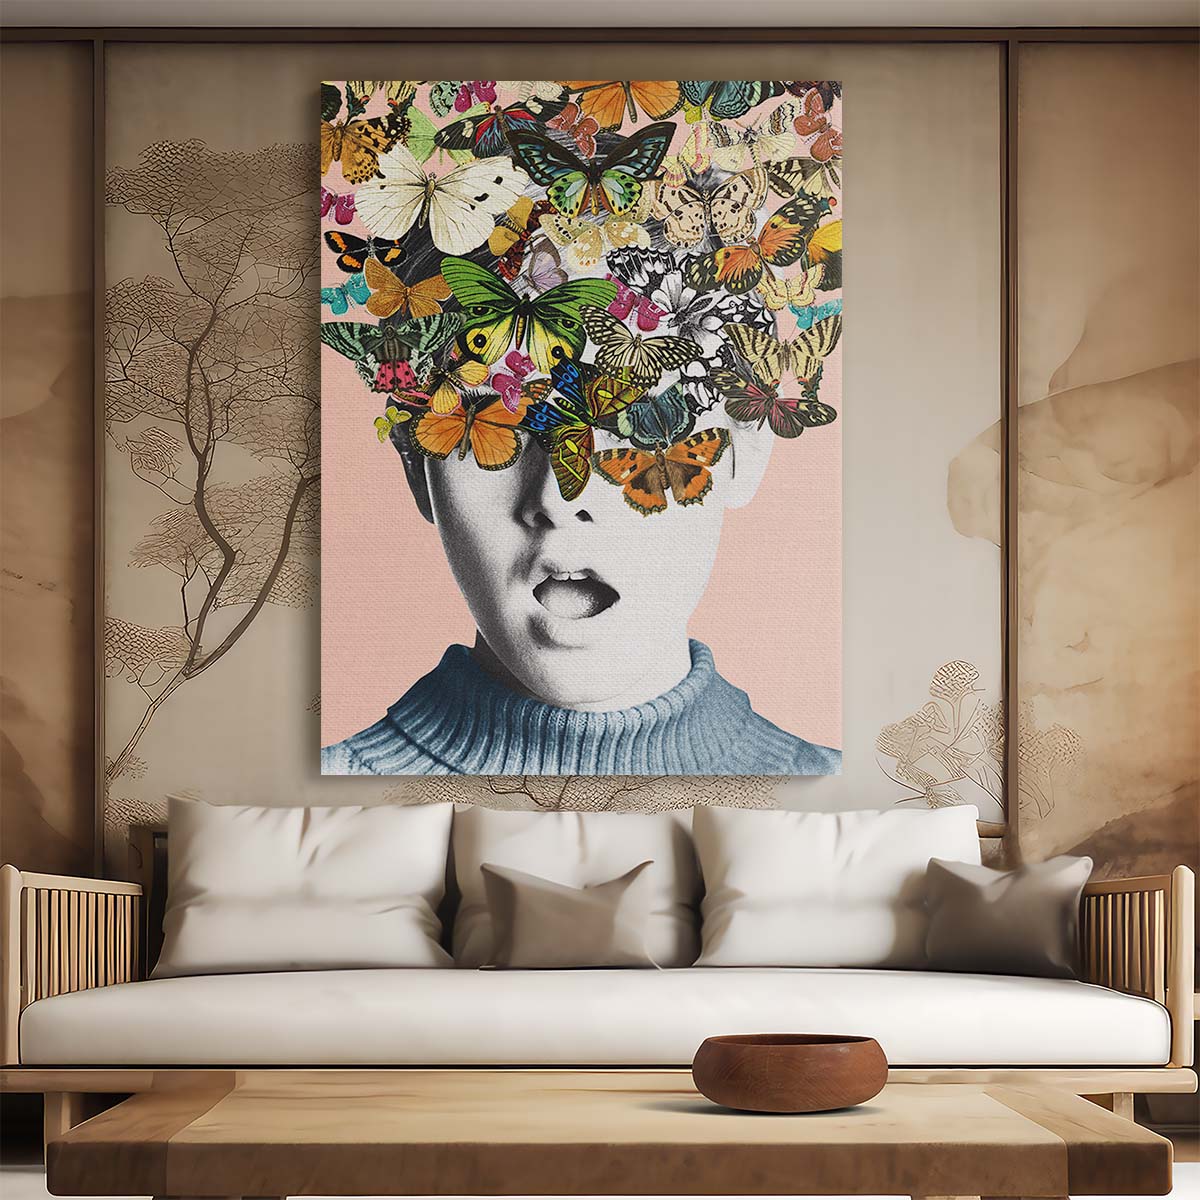 Colorful Surrealistic Butterfly Woman Portrait Photography Wall Art by Luxuriance Designs, made in USA